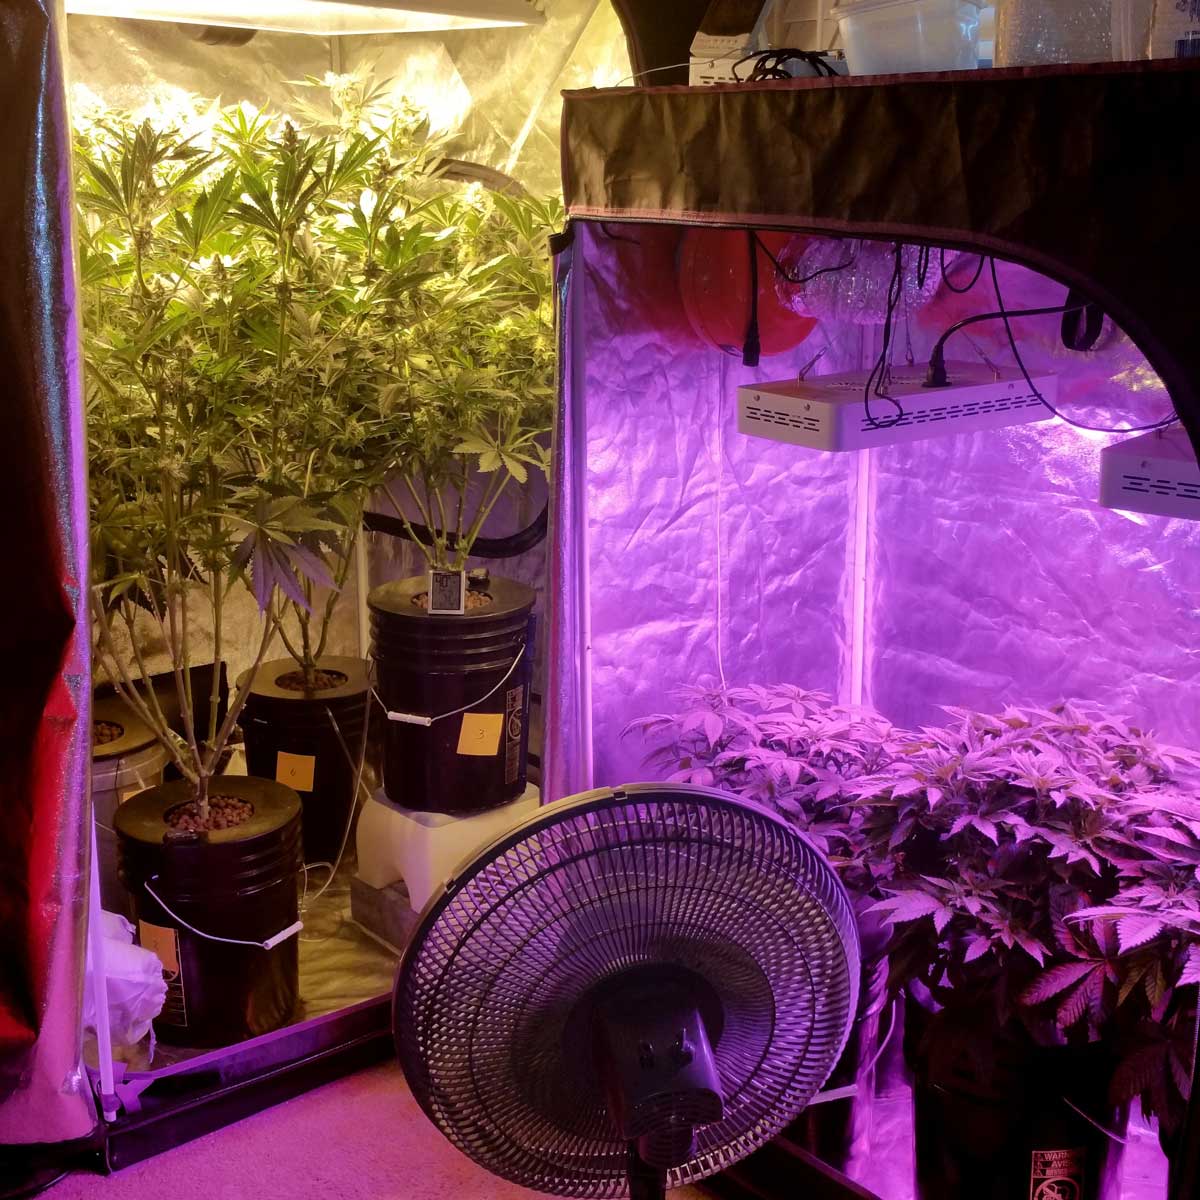 Example of a vegetative and flowering grow tent next to each other